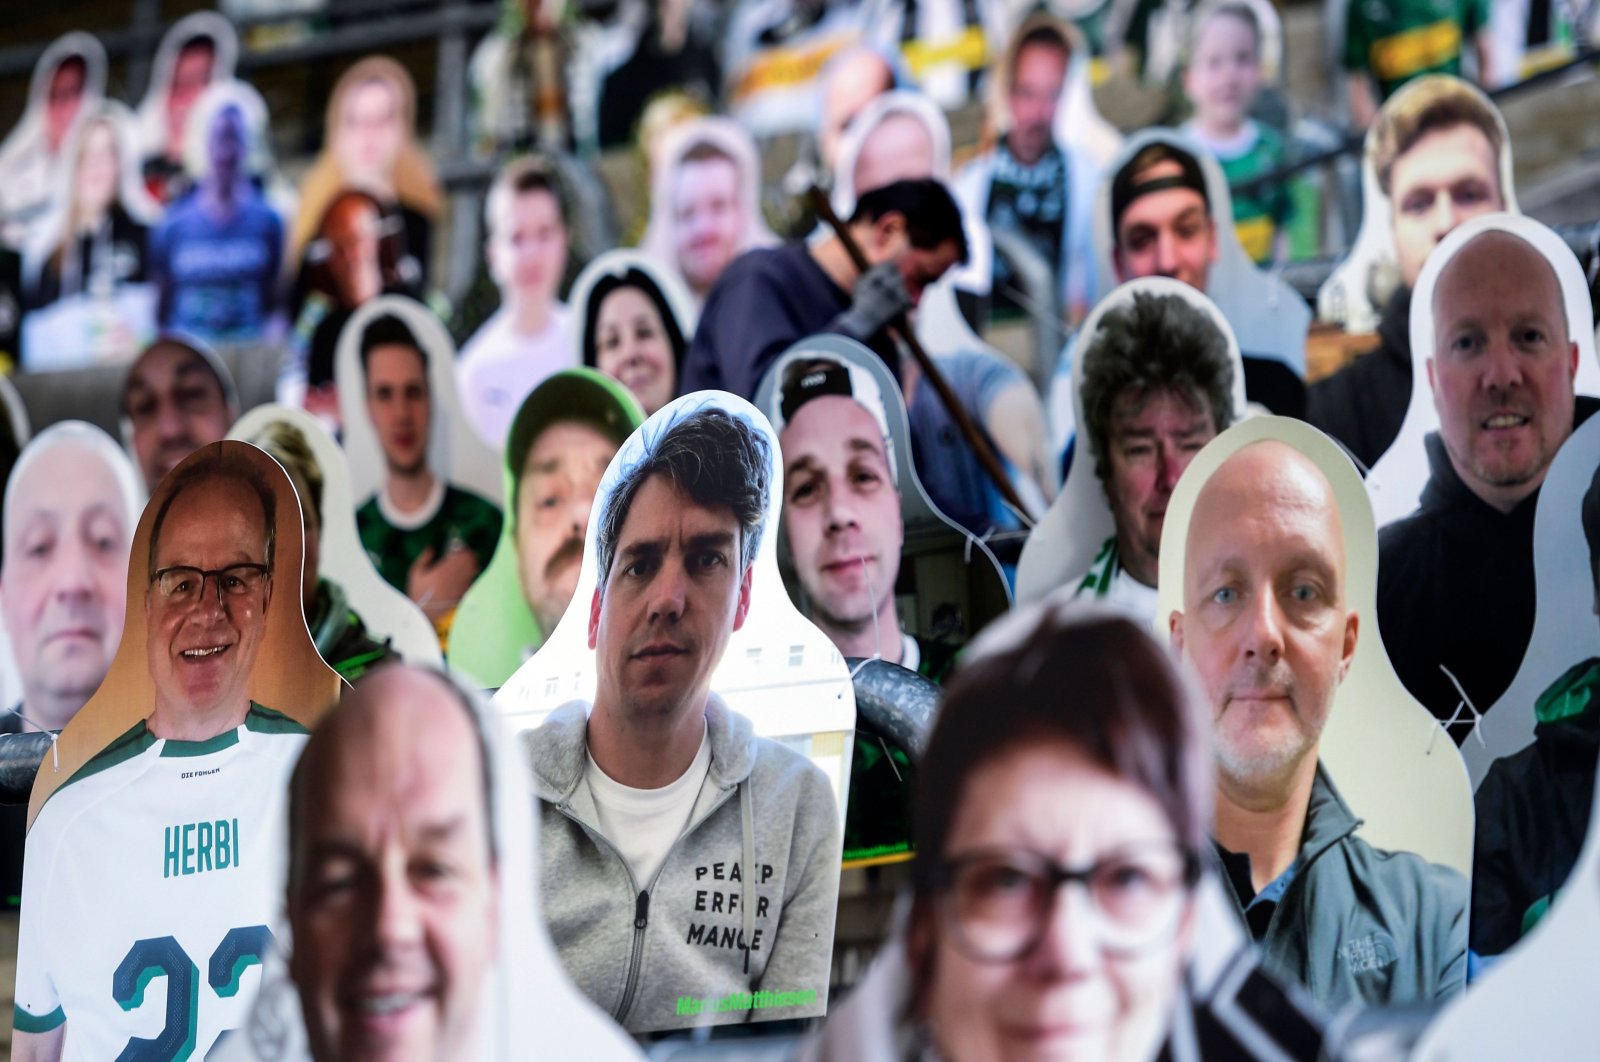 Cardboard cut-outs with portraits of Borussia Moenchengladbach's supporters are seen at the Borussia Park football stadium in Moenchengladbach, western Germany, amid the novel coronavirus COVID-19 pandemic, April 16, 2020. (AFP Photo)